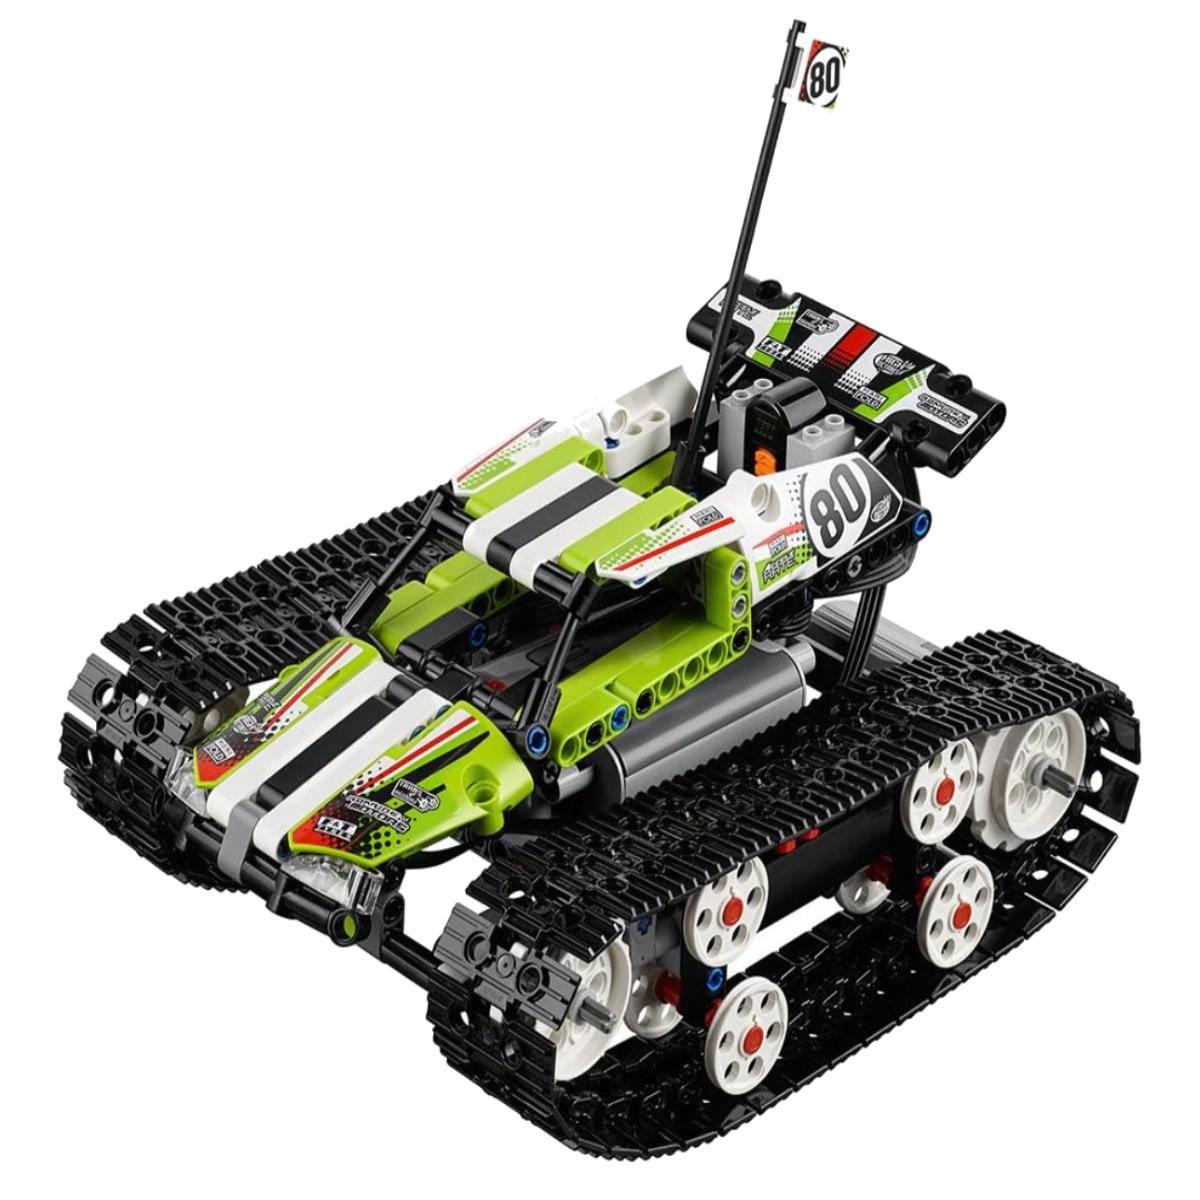 A fully built LEGO Technic RC Tracked Racer